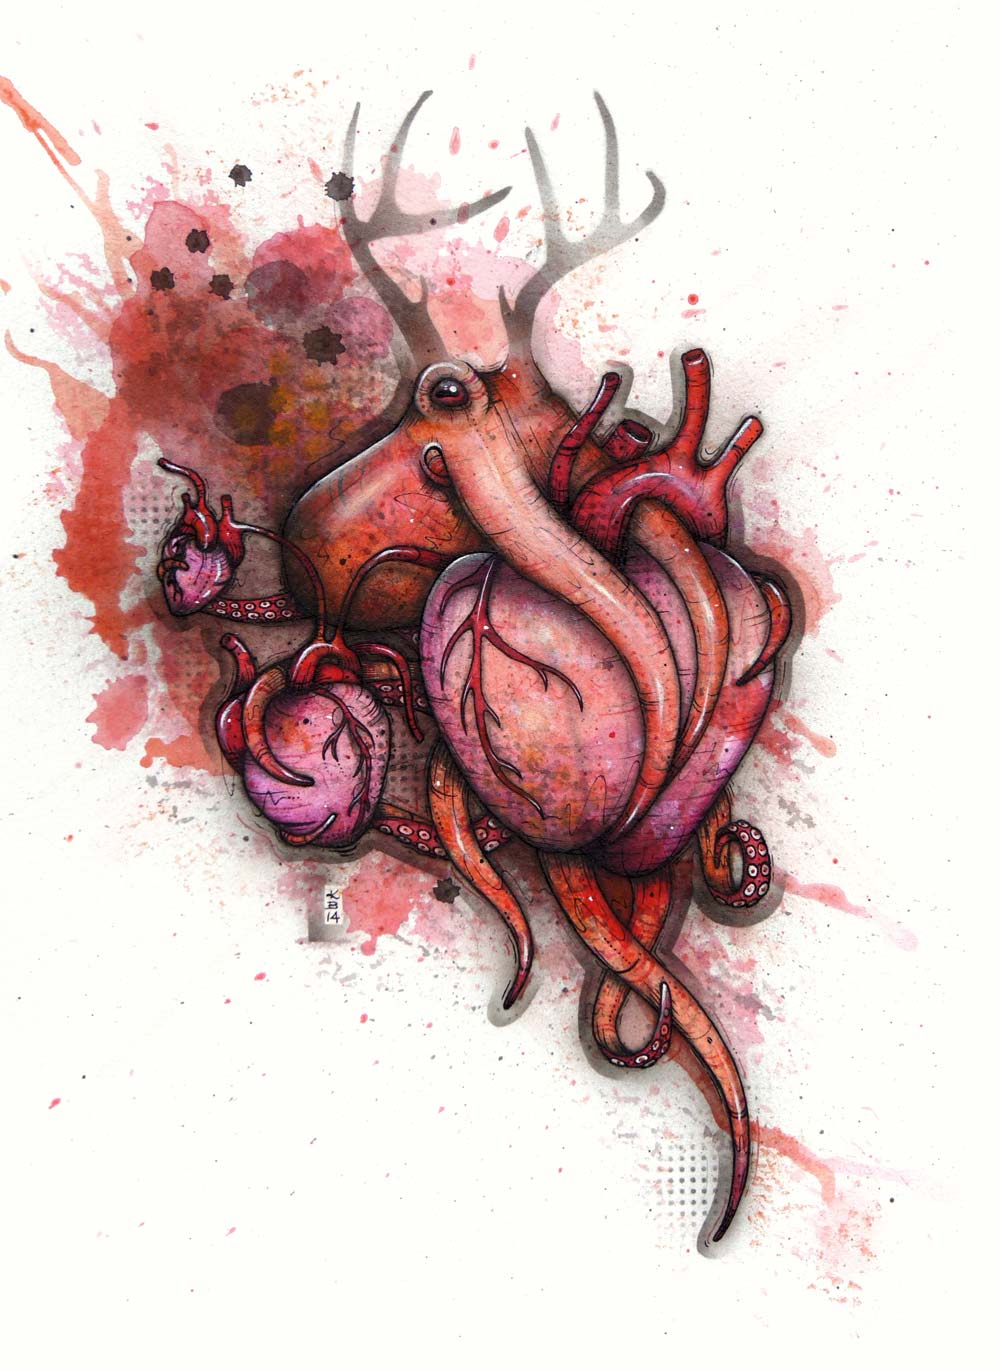 An antlered octopus holds three anatomical hearts